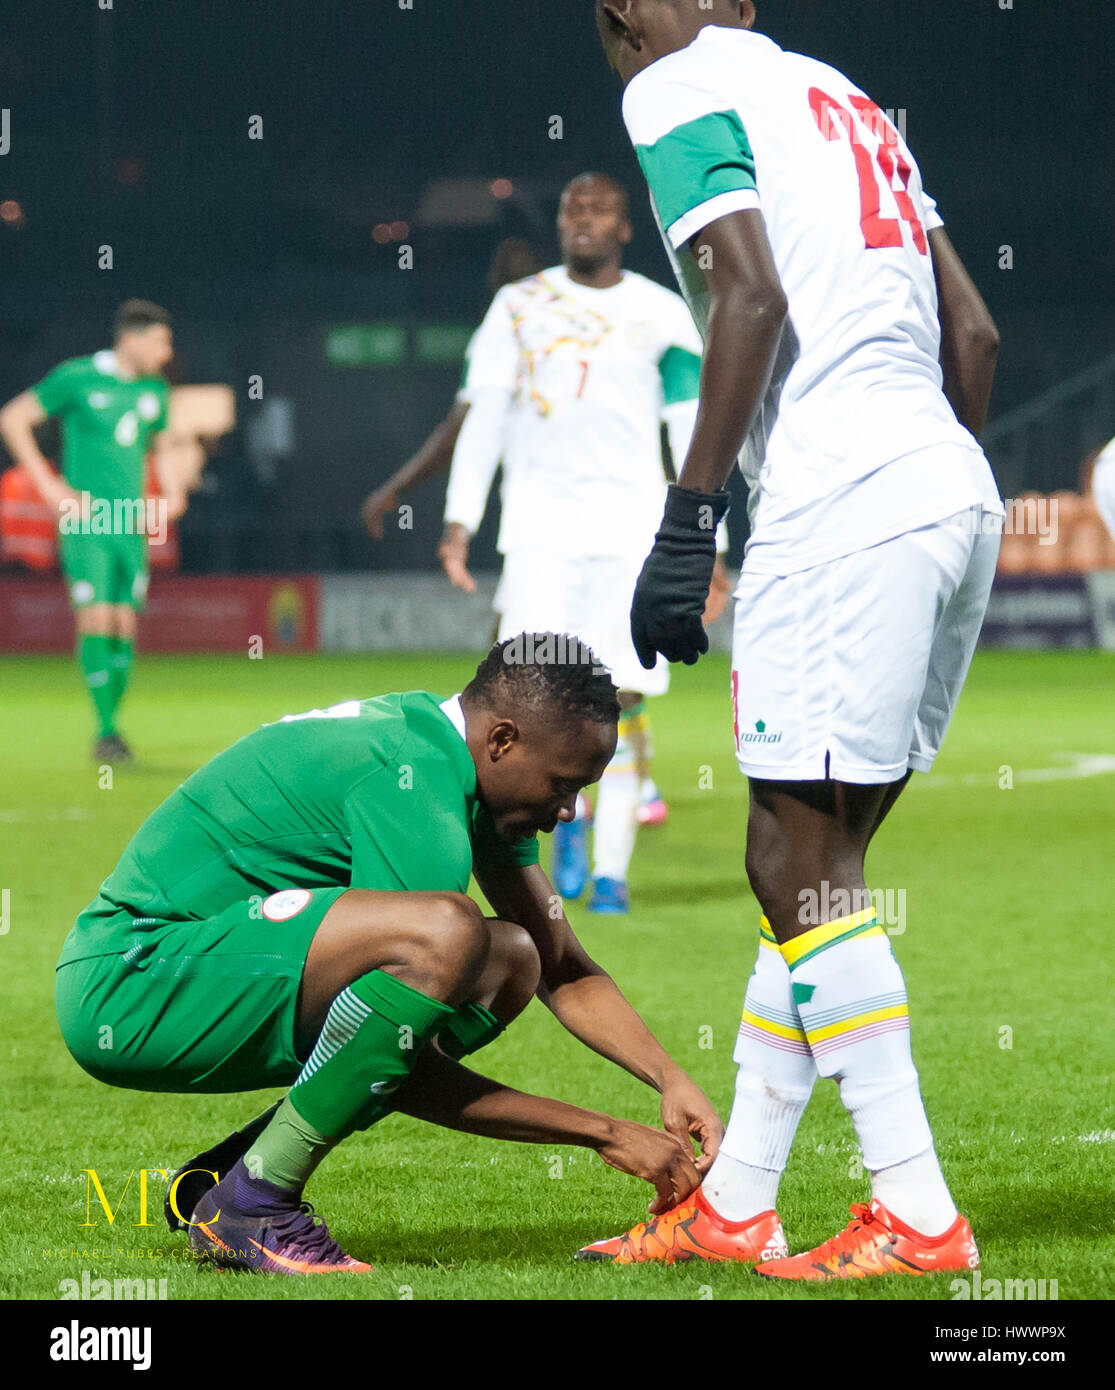 The Hive, Barnet,  England. 23rd March 2017. Ahmed Musa of Nigeria ties the boot lace of Adama Mbengue of Senegal during the International Friendly match between Nigeria and Senegal. Michael Tubi / Alamy Live News Stock Photo